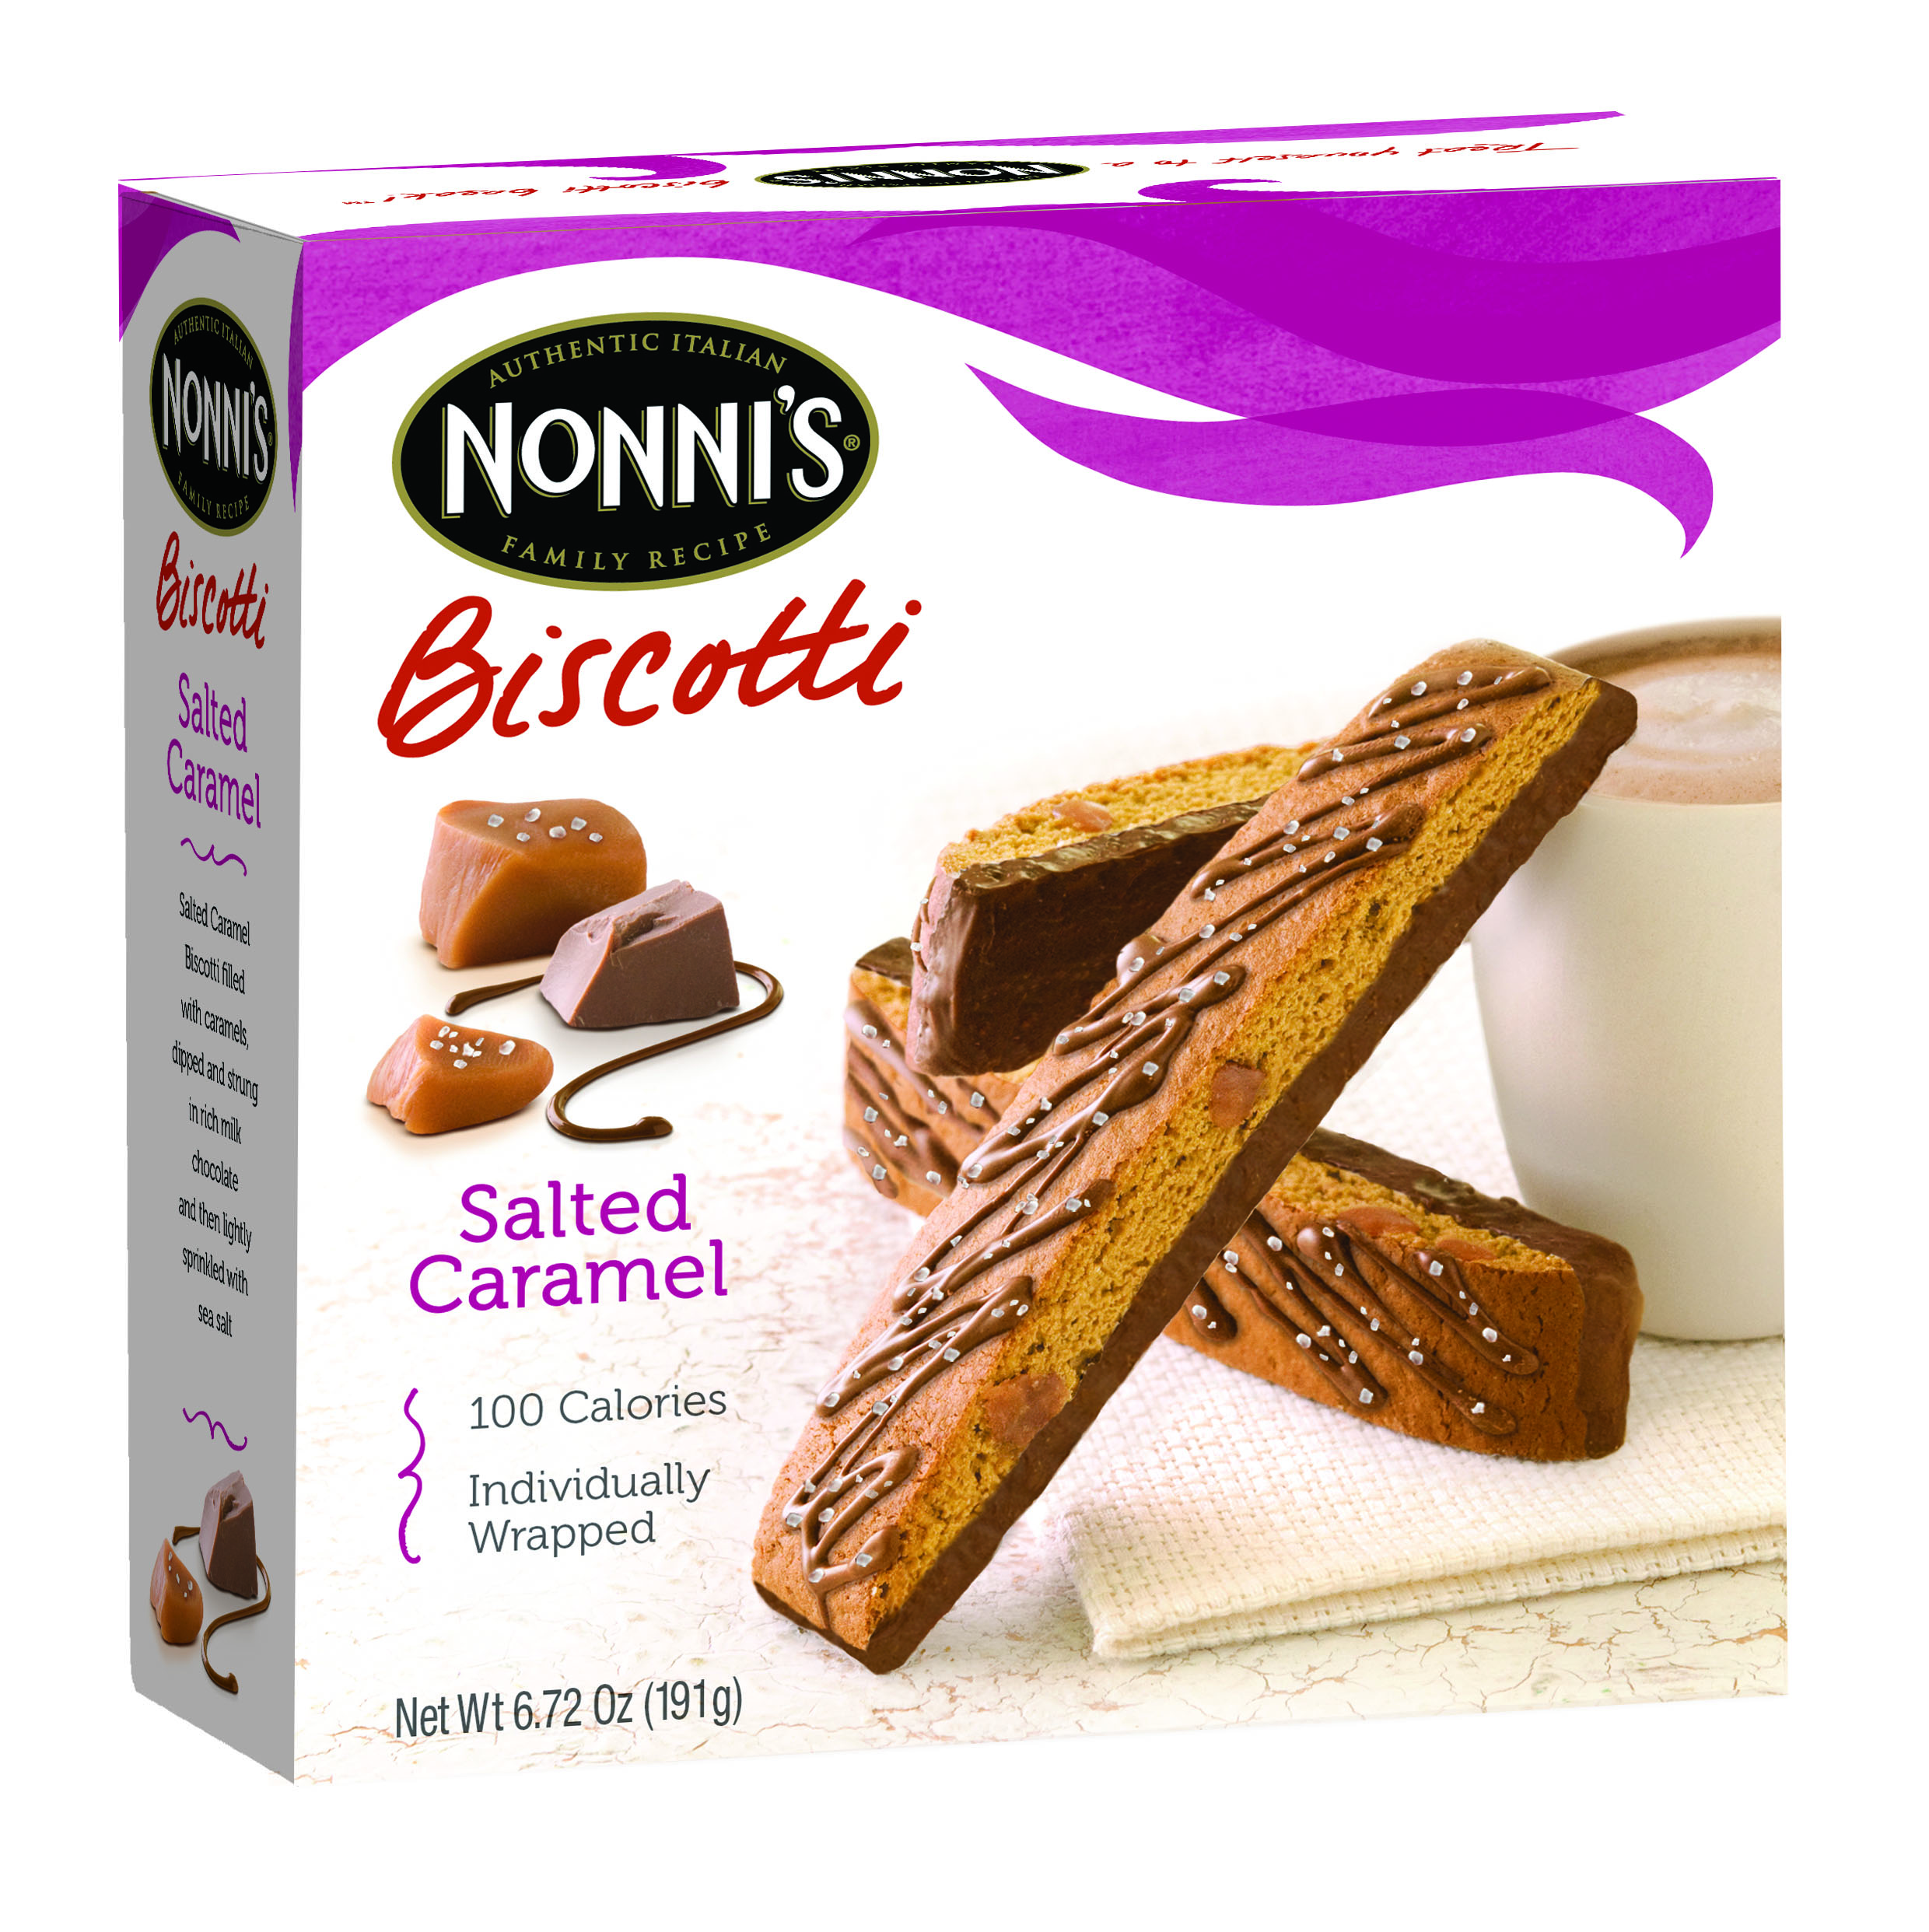 Nonni’s Salted Caramel Biscotti Makes Every Snack Time Special: Review